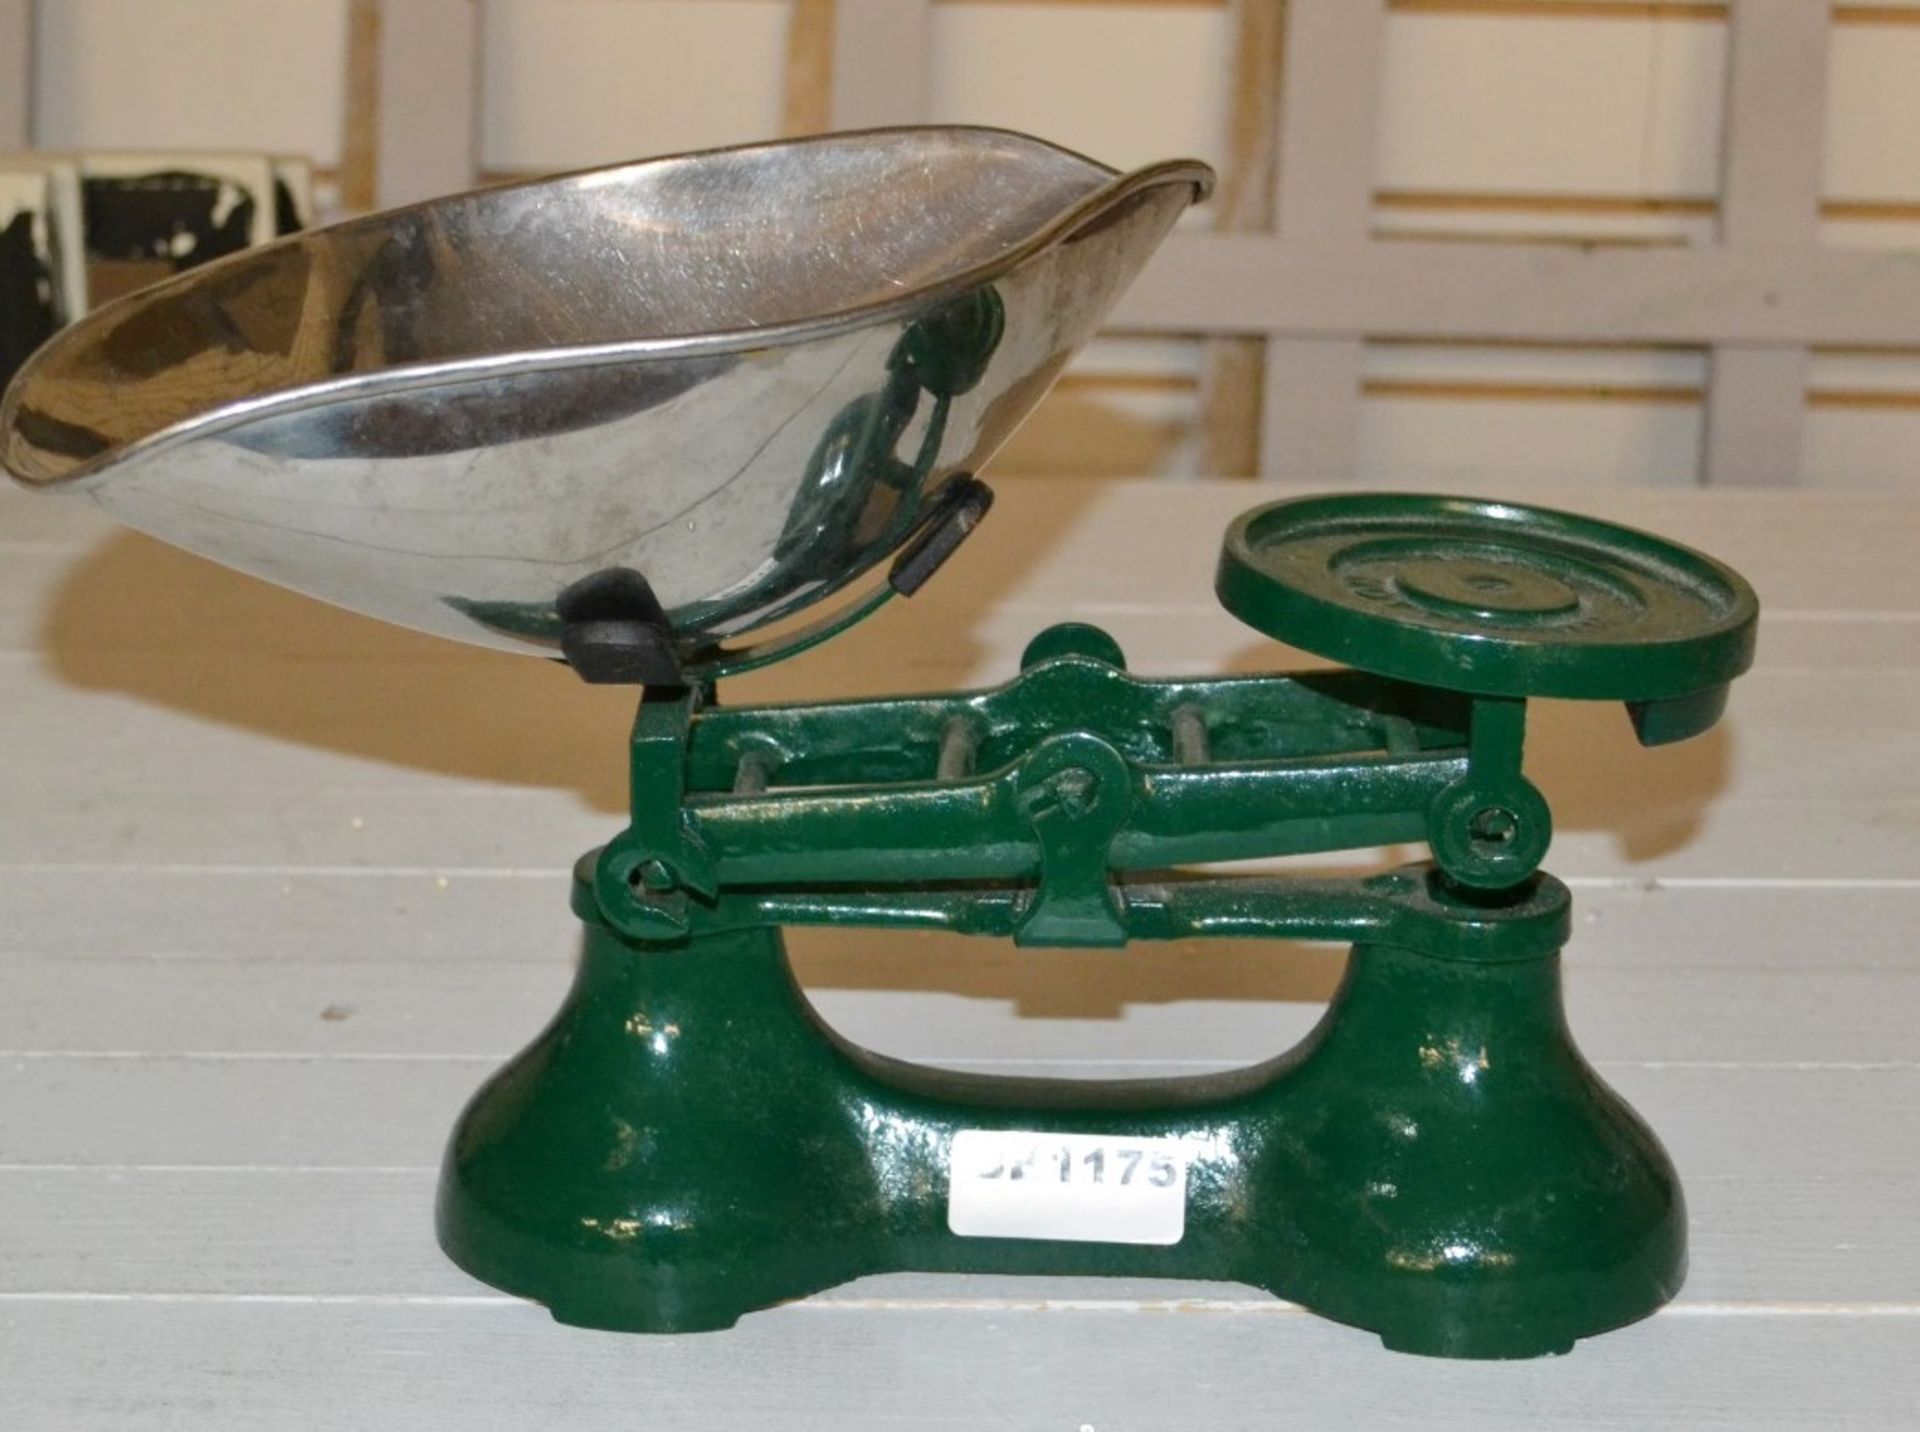 1 x Vintage Scales Branded With 'Boots Nottingham' - Ref BB1175 - CL351 - Location: Chorley PR6